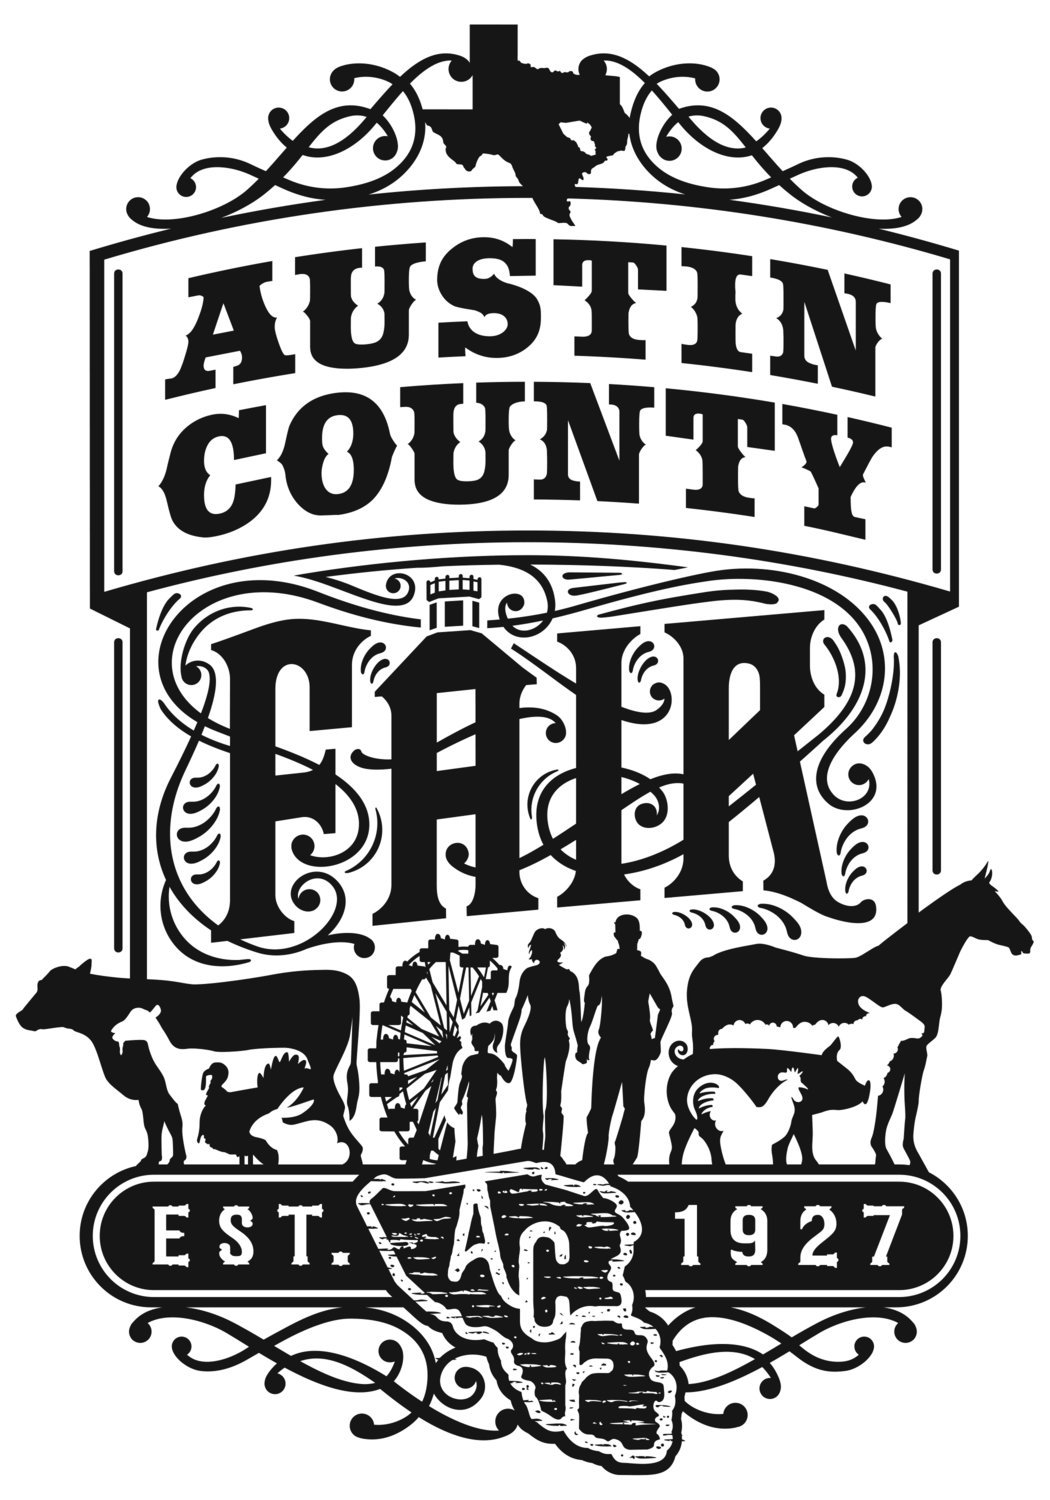 Austin County Fair events taking place The Sealy News